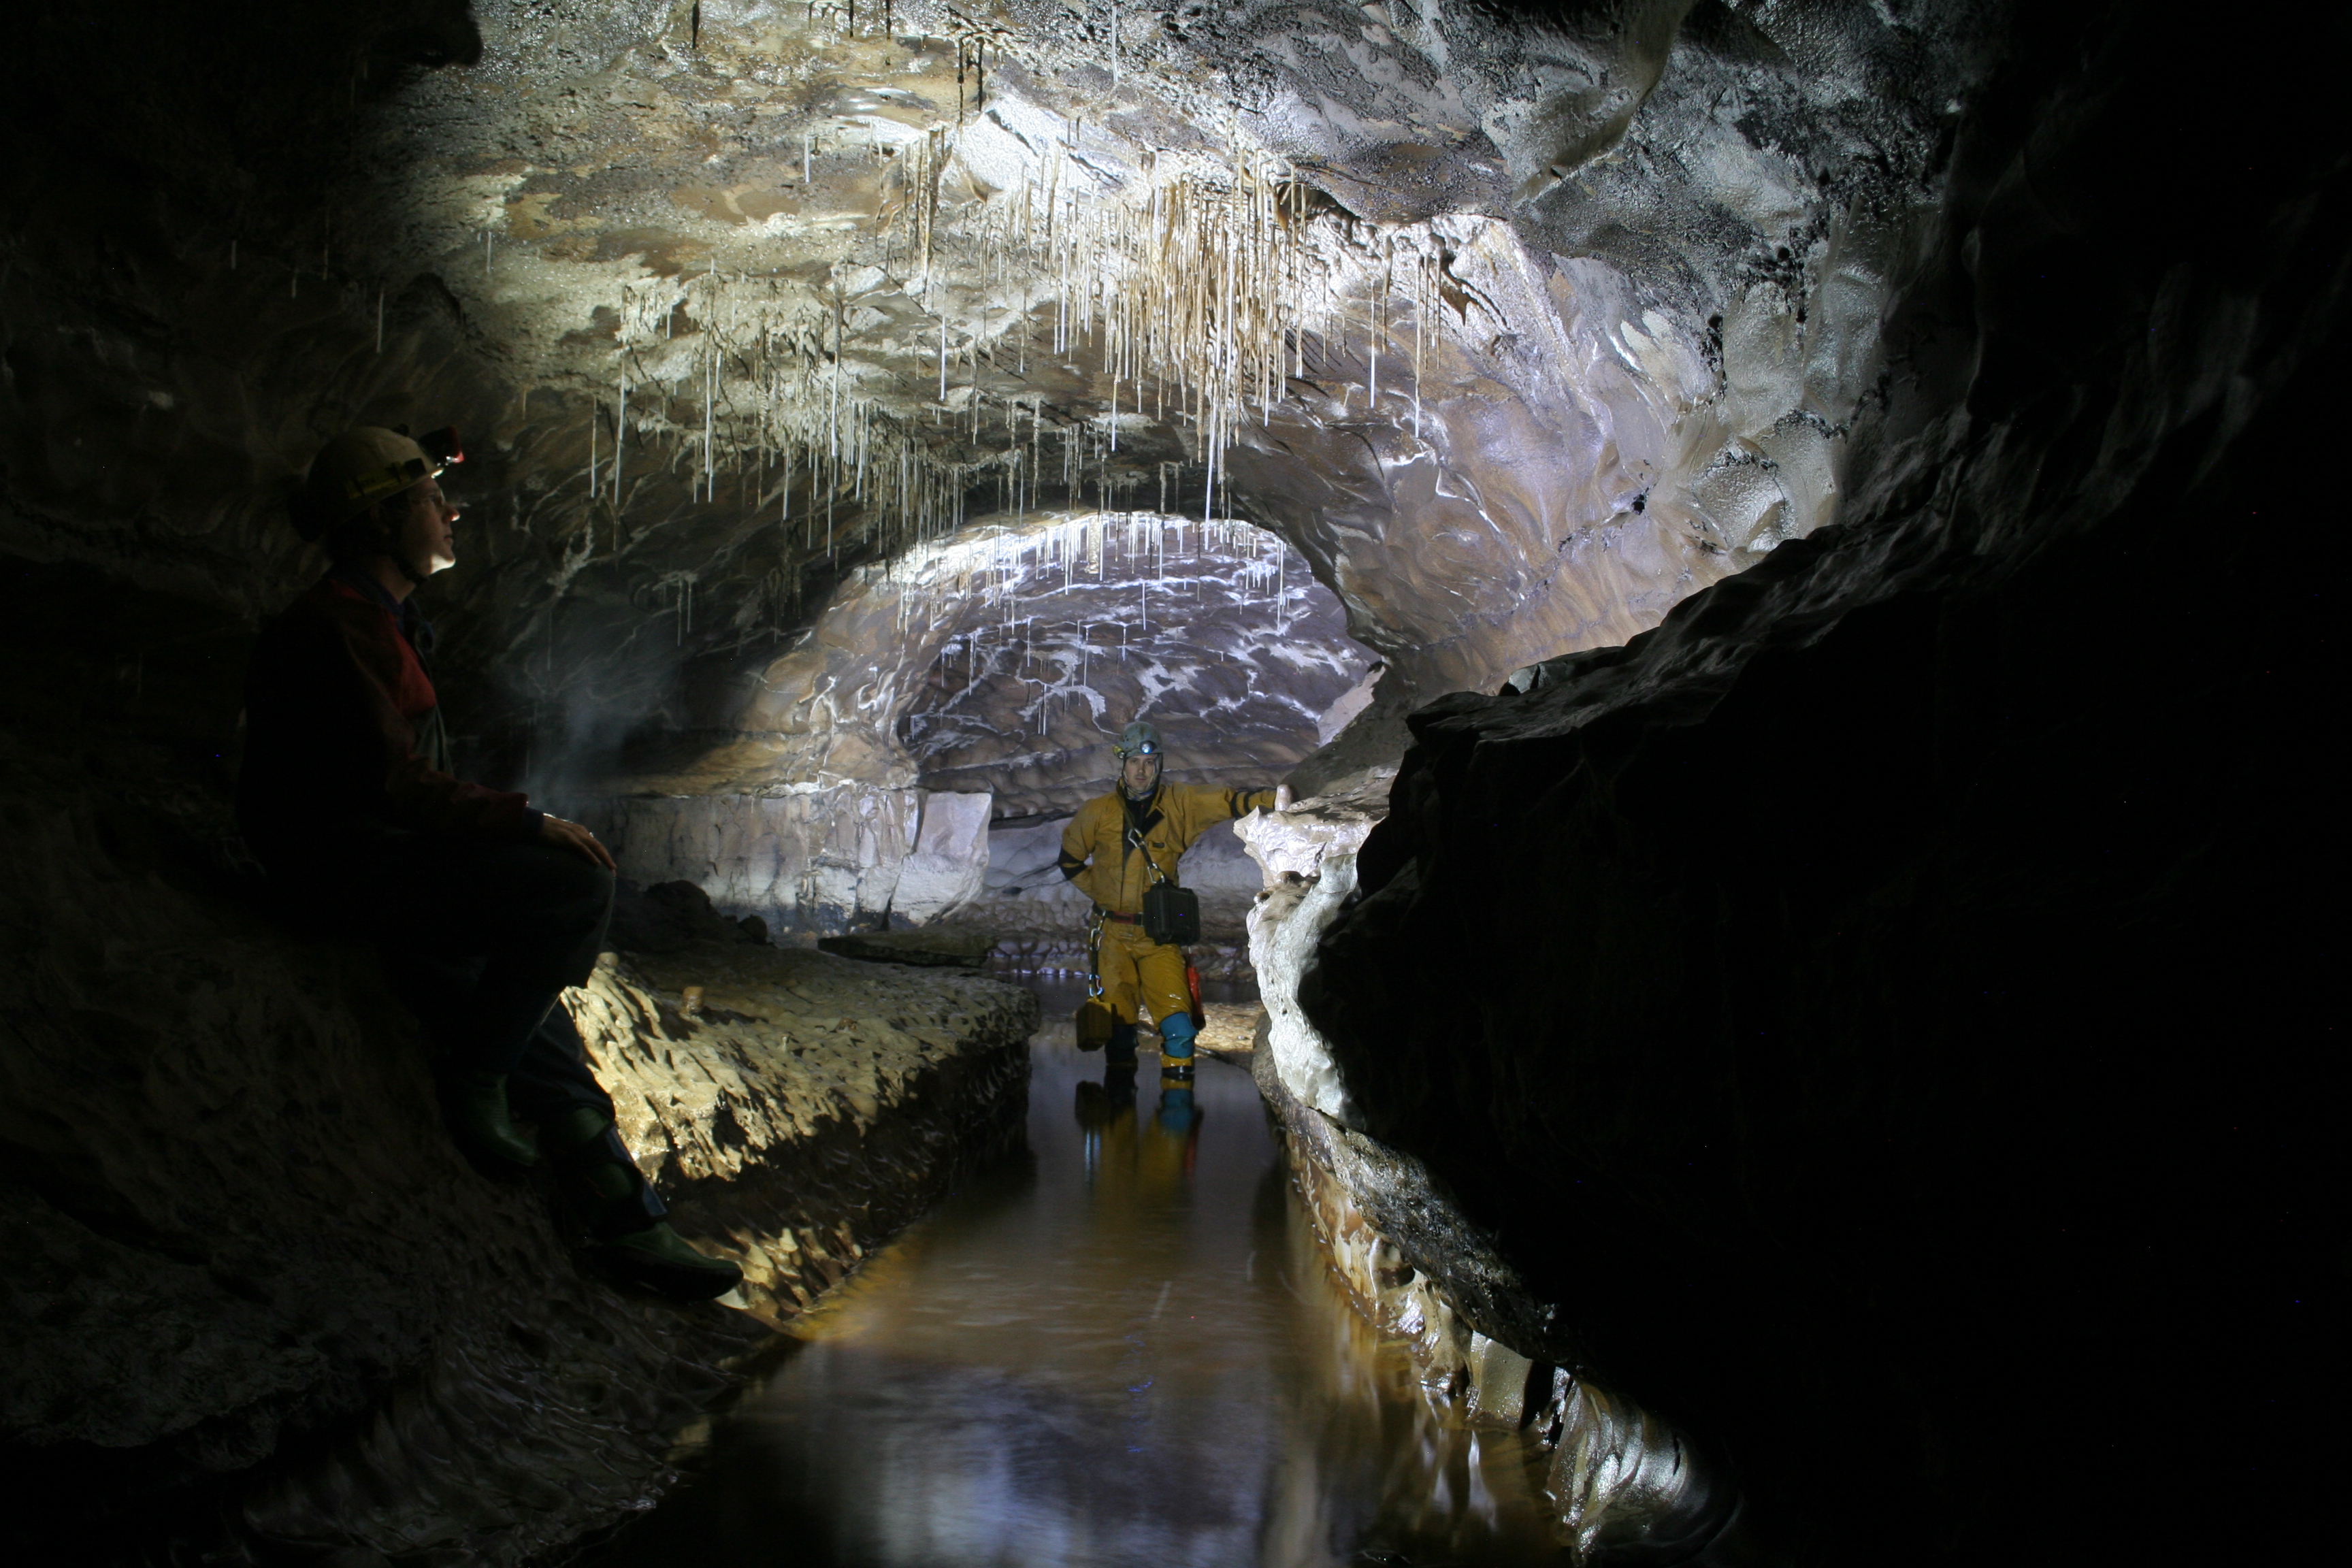 Caving Passage in Notts II, Yorkshire